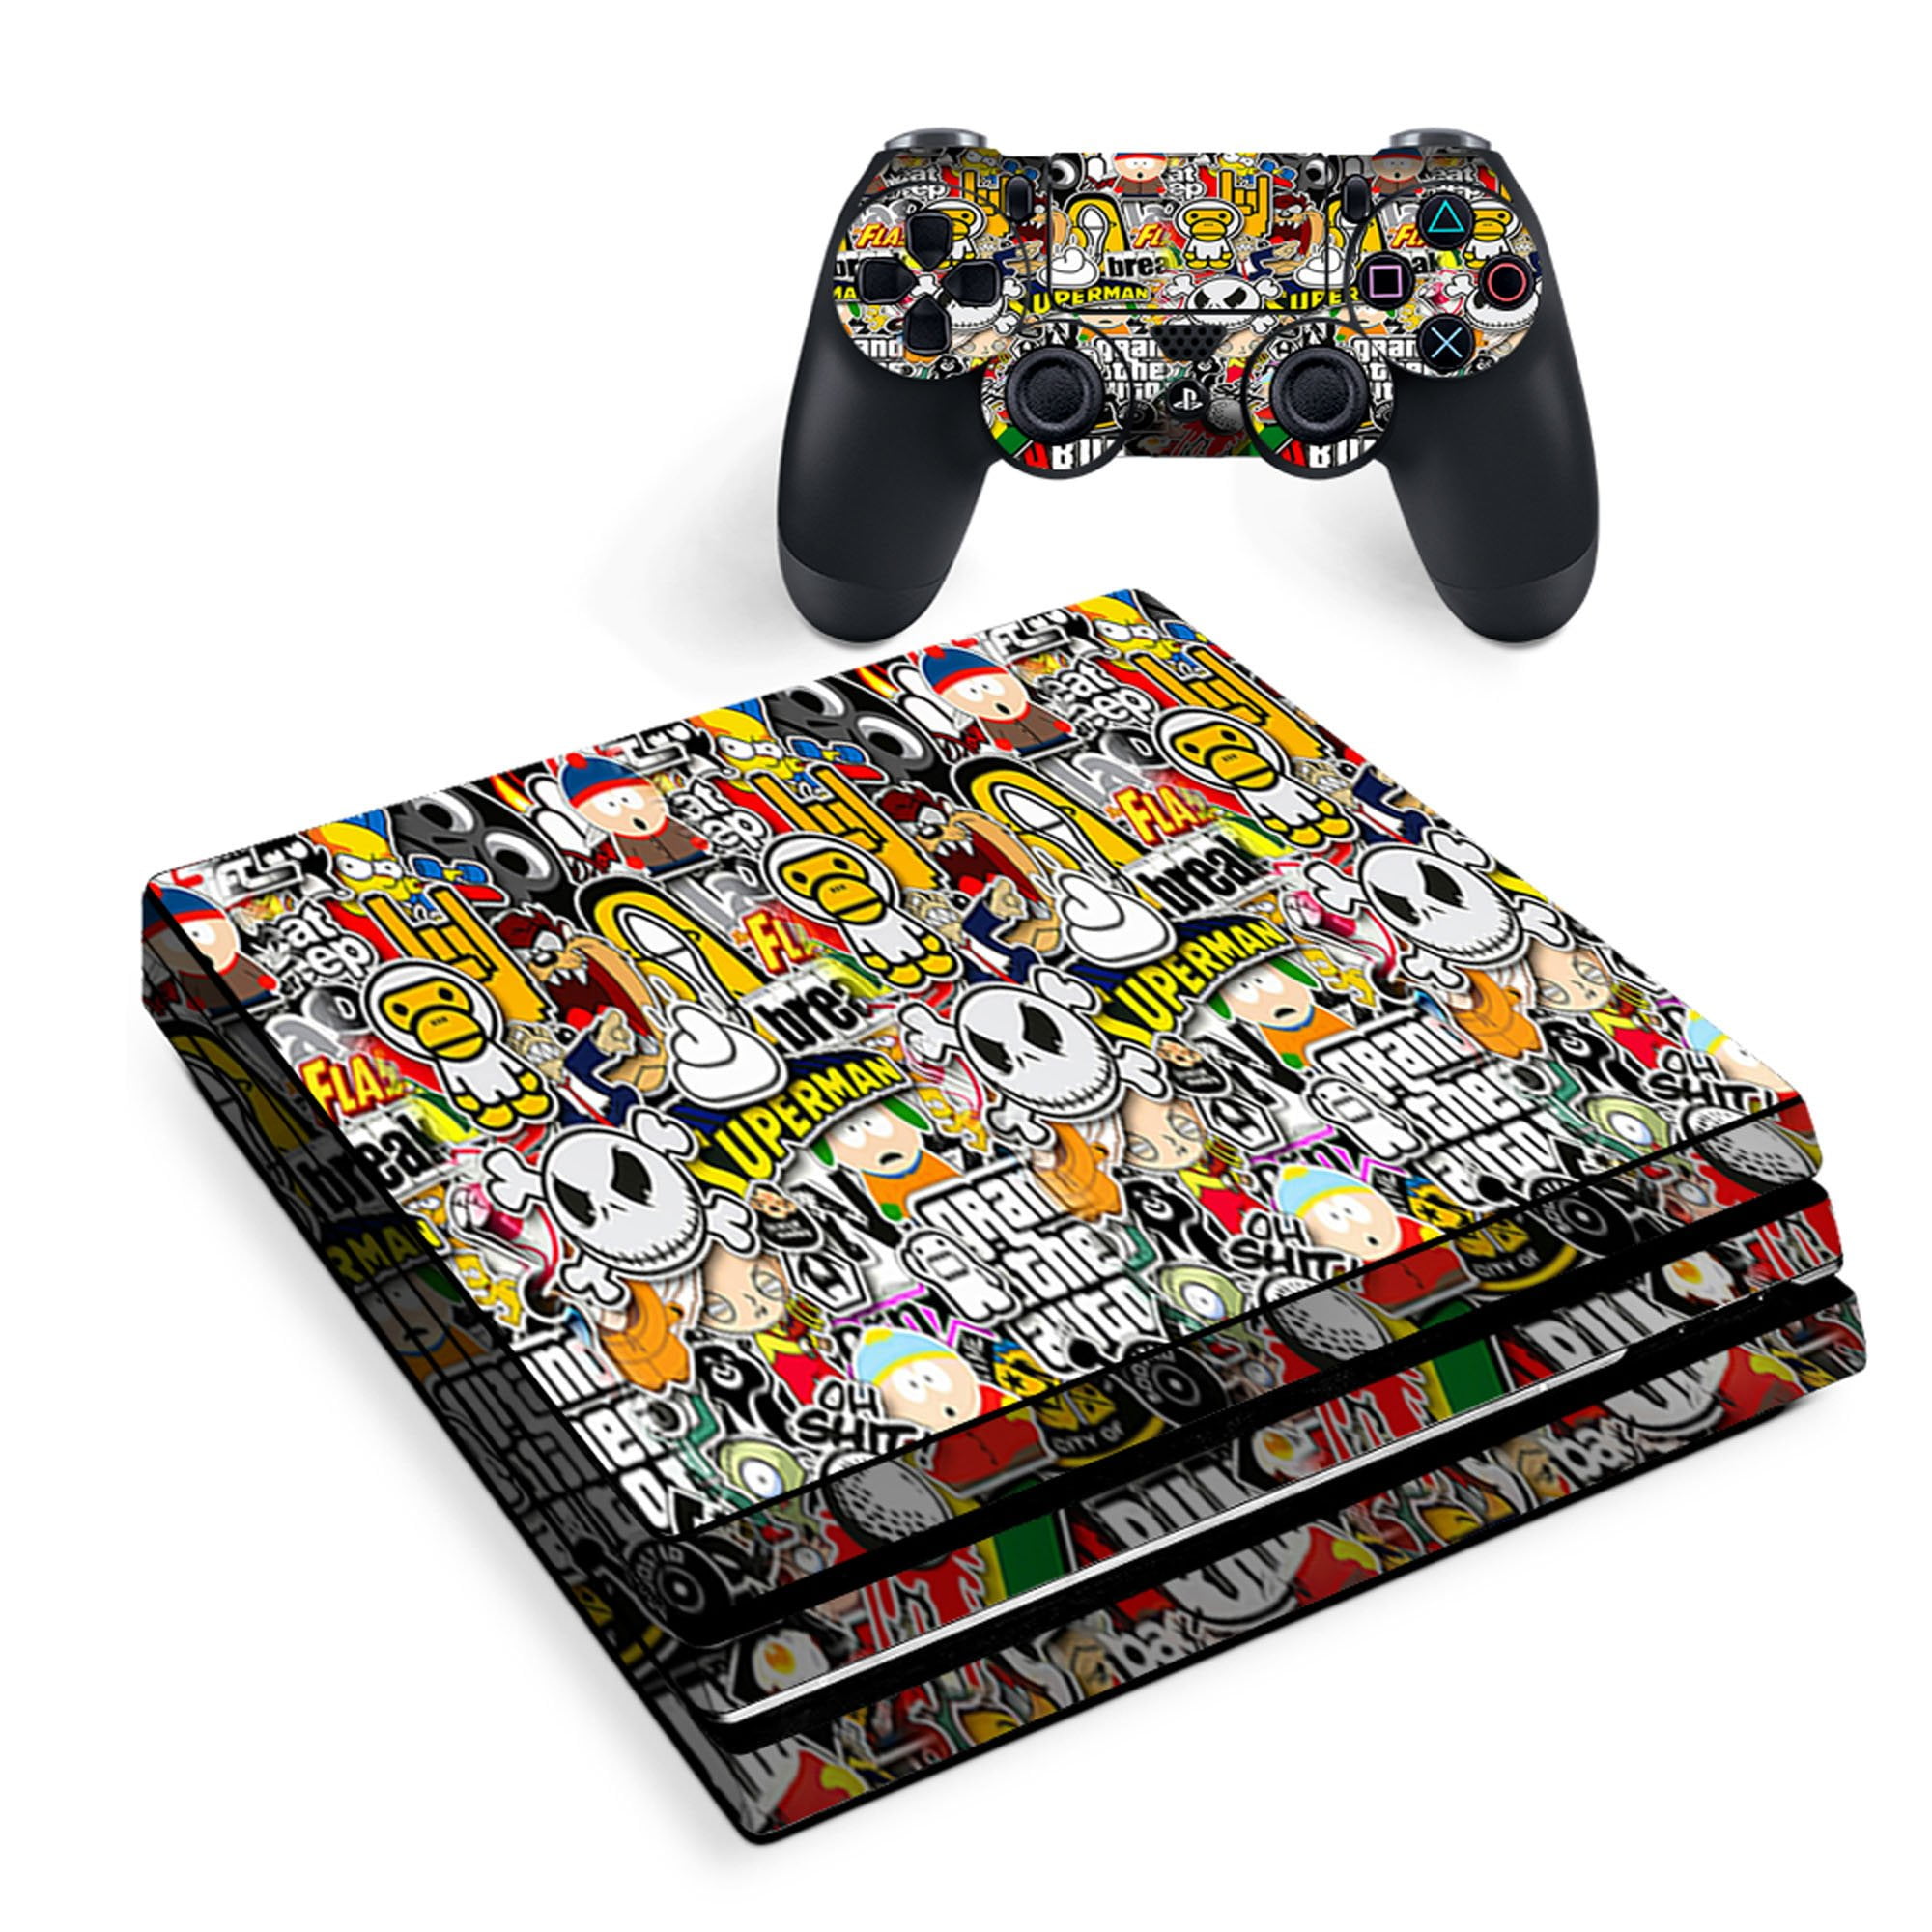 2 Controller Skin Sticker for Playstation 4 Pro Game Accessories,A YWZQ Camouflage Stickers Viny Decal Sticker for PS4 Pro Decal Console